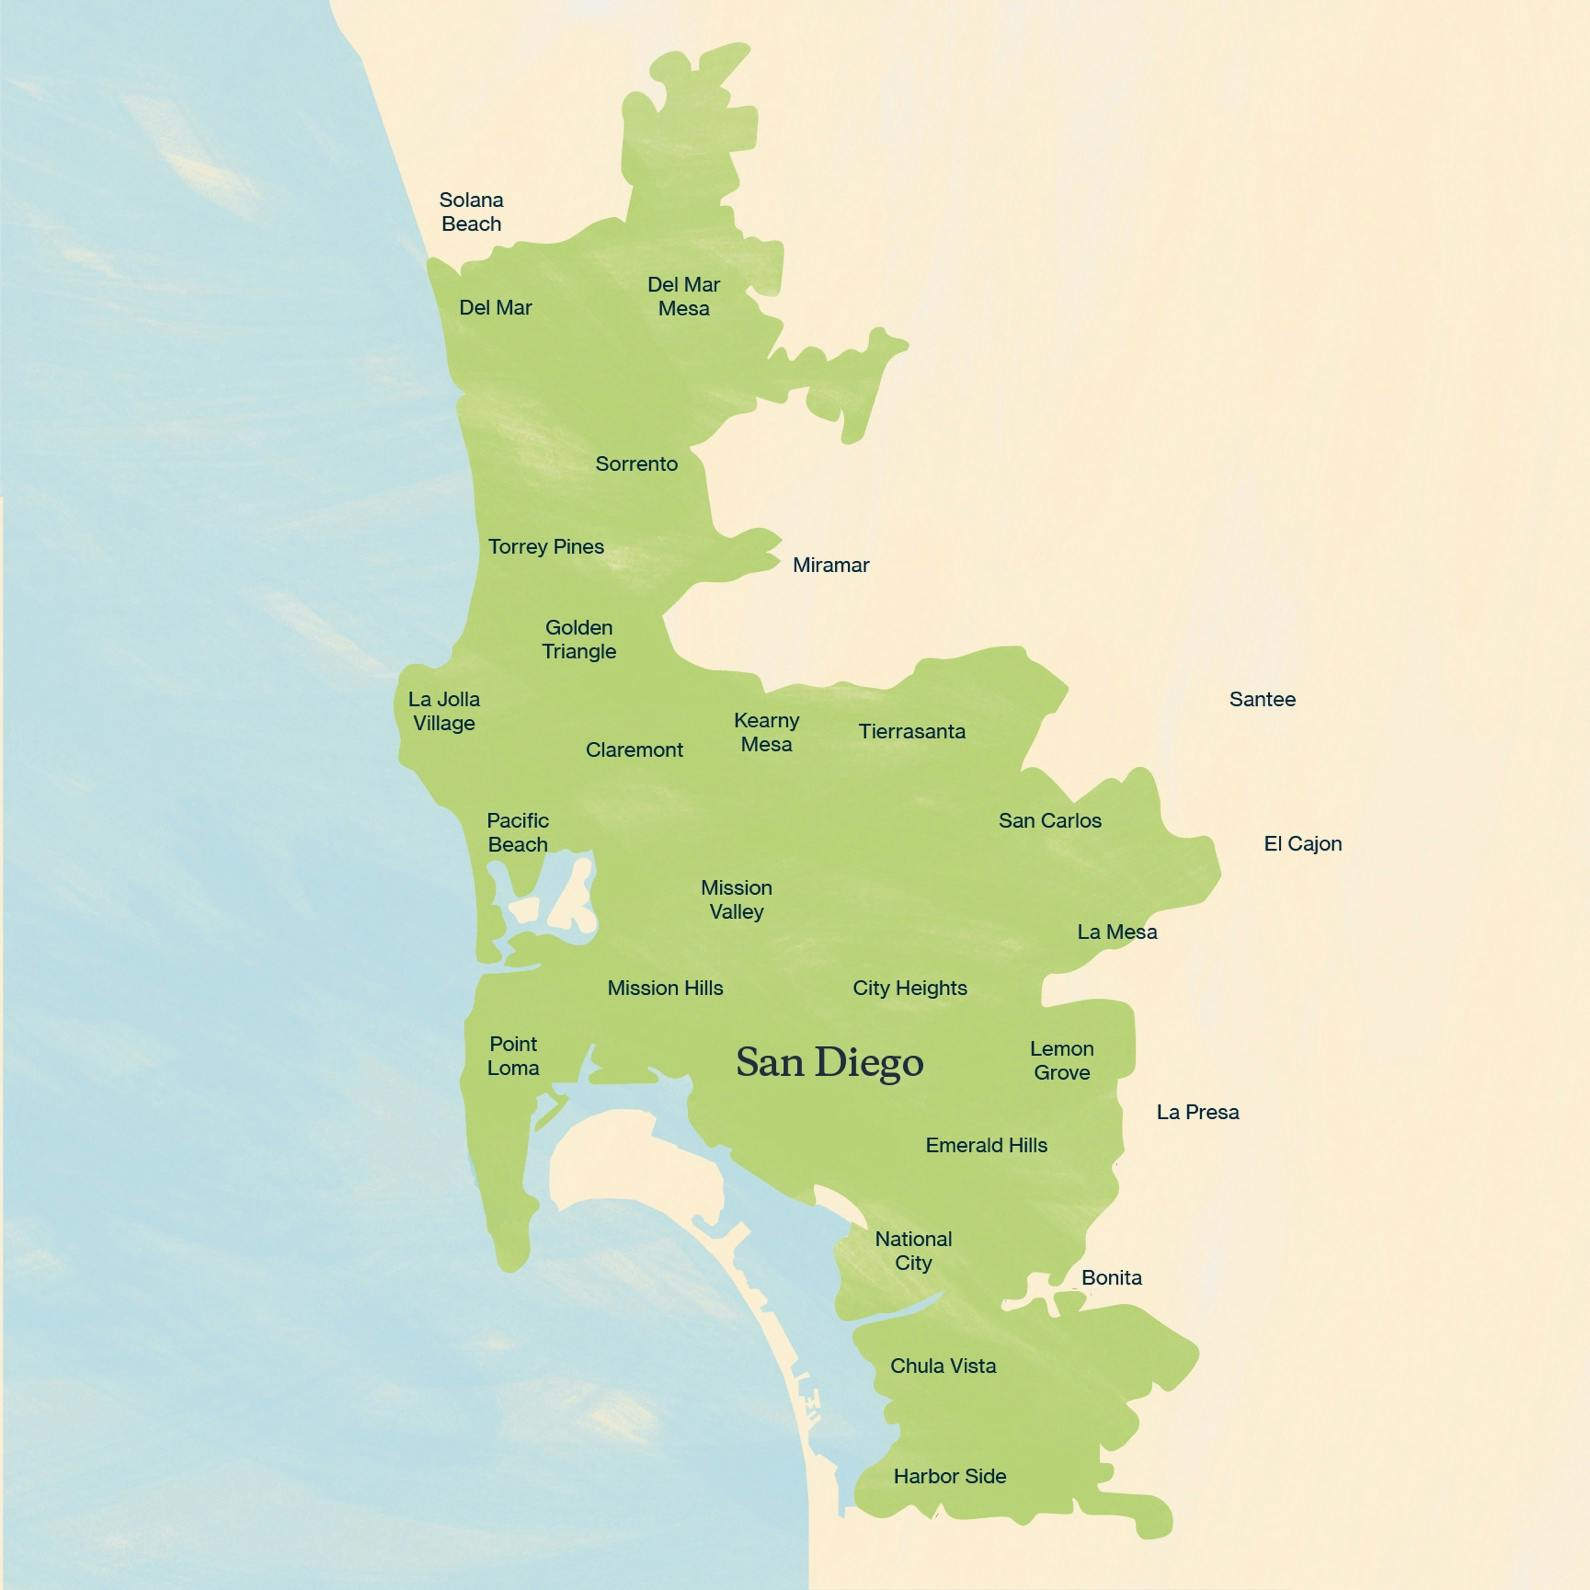 The San Diego courier service zone is shown in green